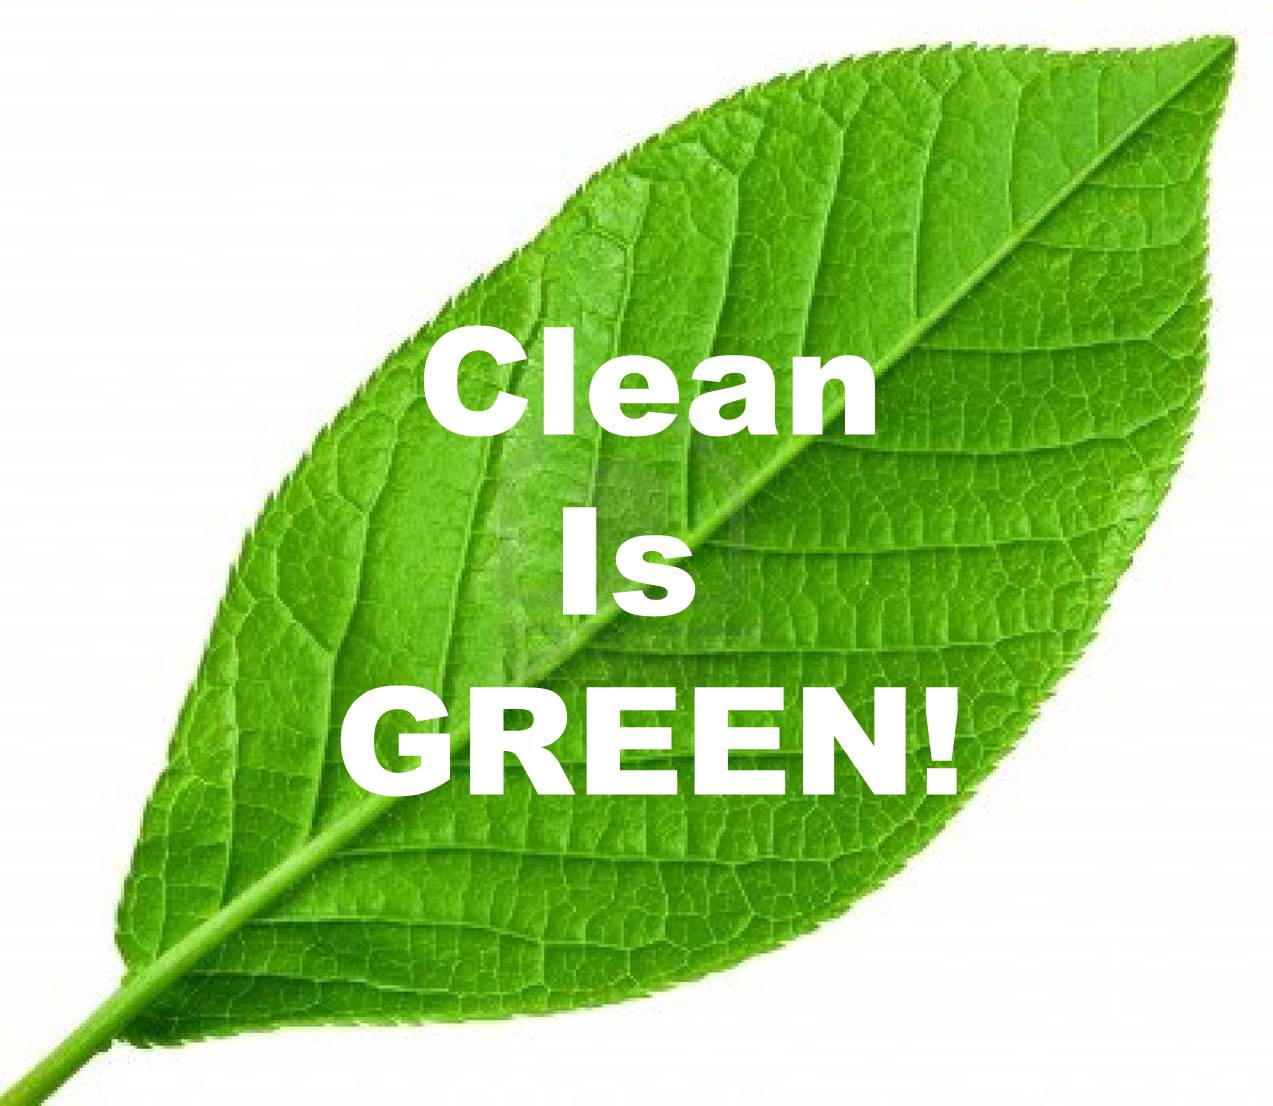 Going Green Chemicals Logo - Are “green” chemicals more expensive? If so, why should cleaners